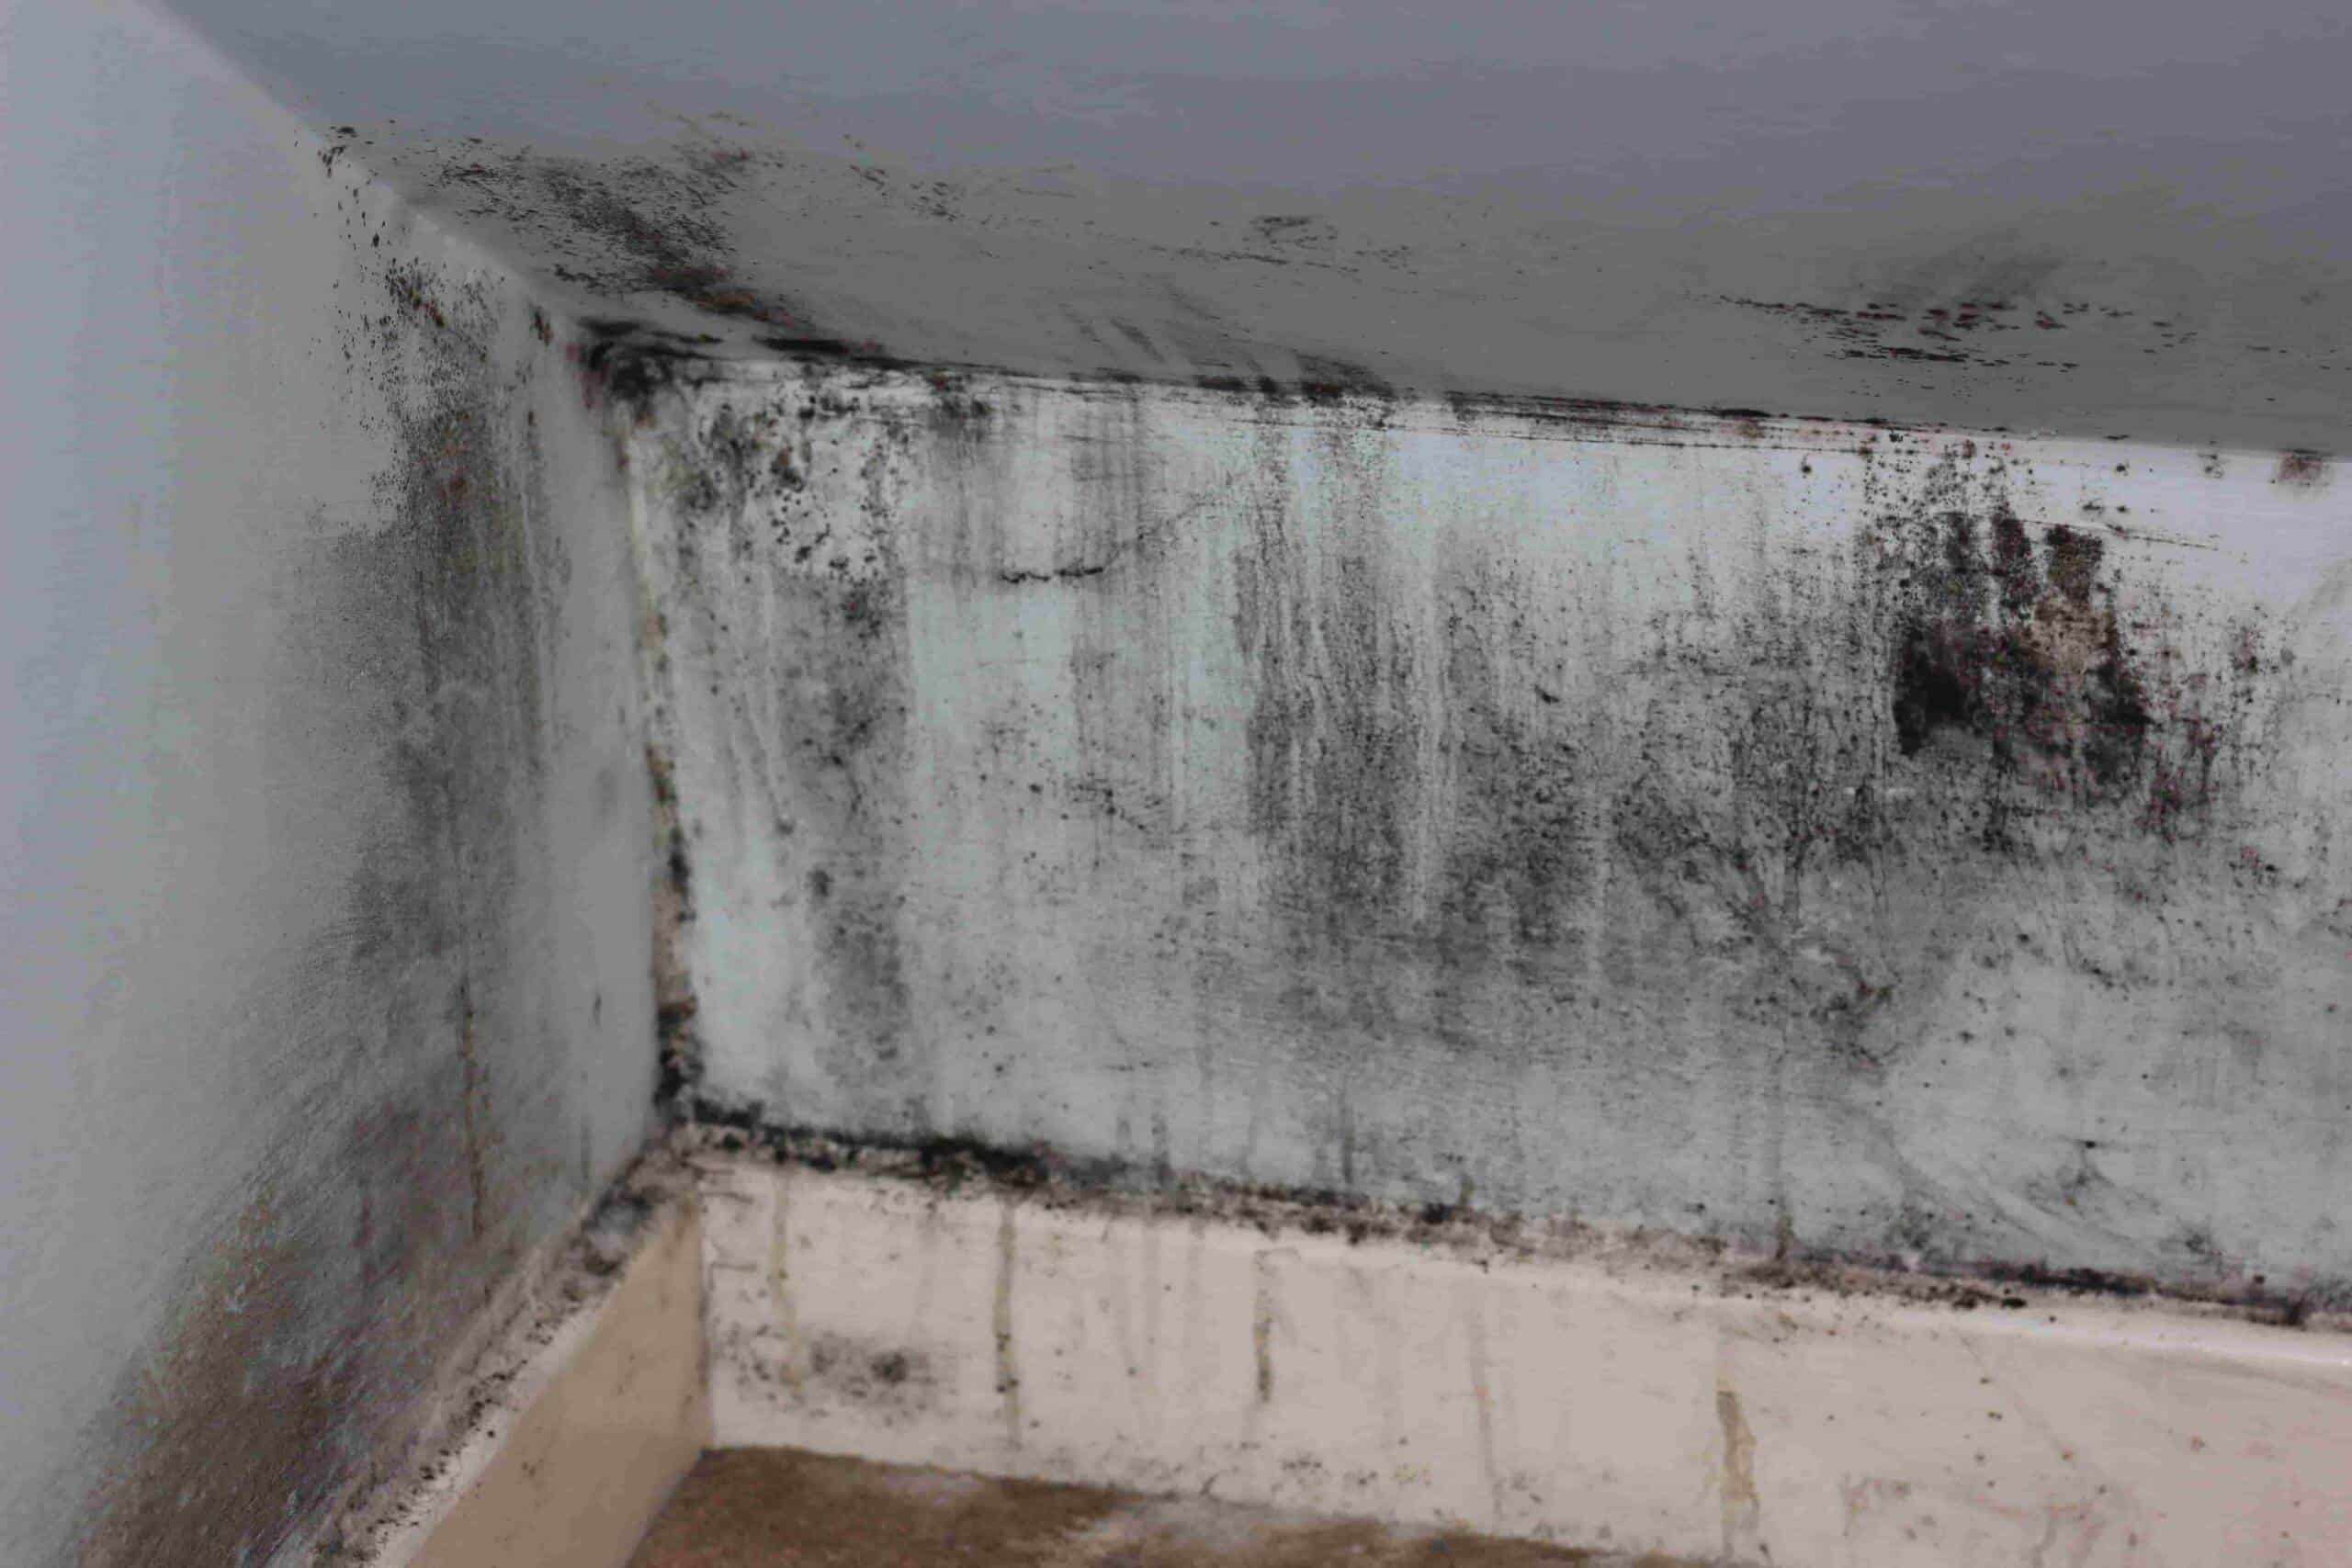 How Do I Win a Personal Injury Case for Mold in Florida?